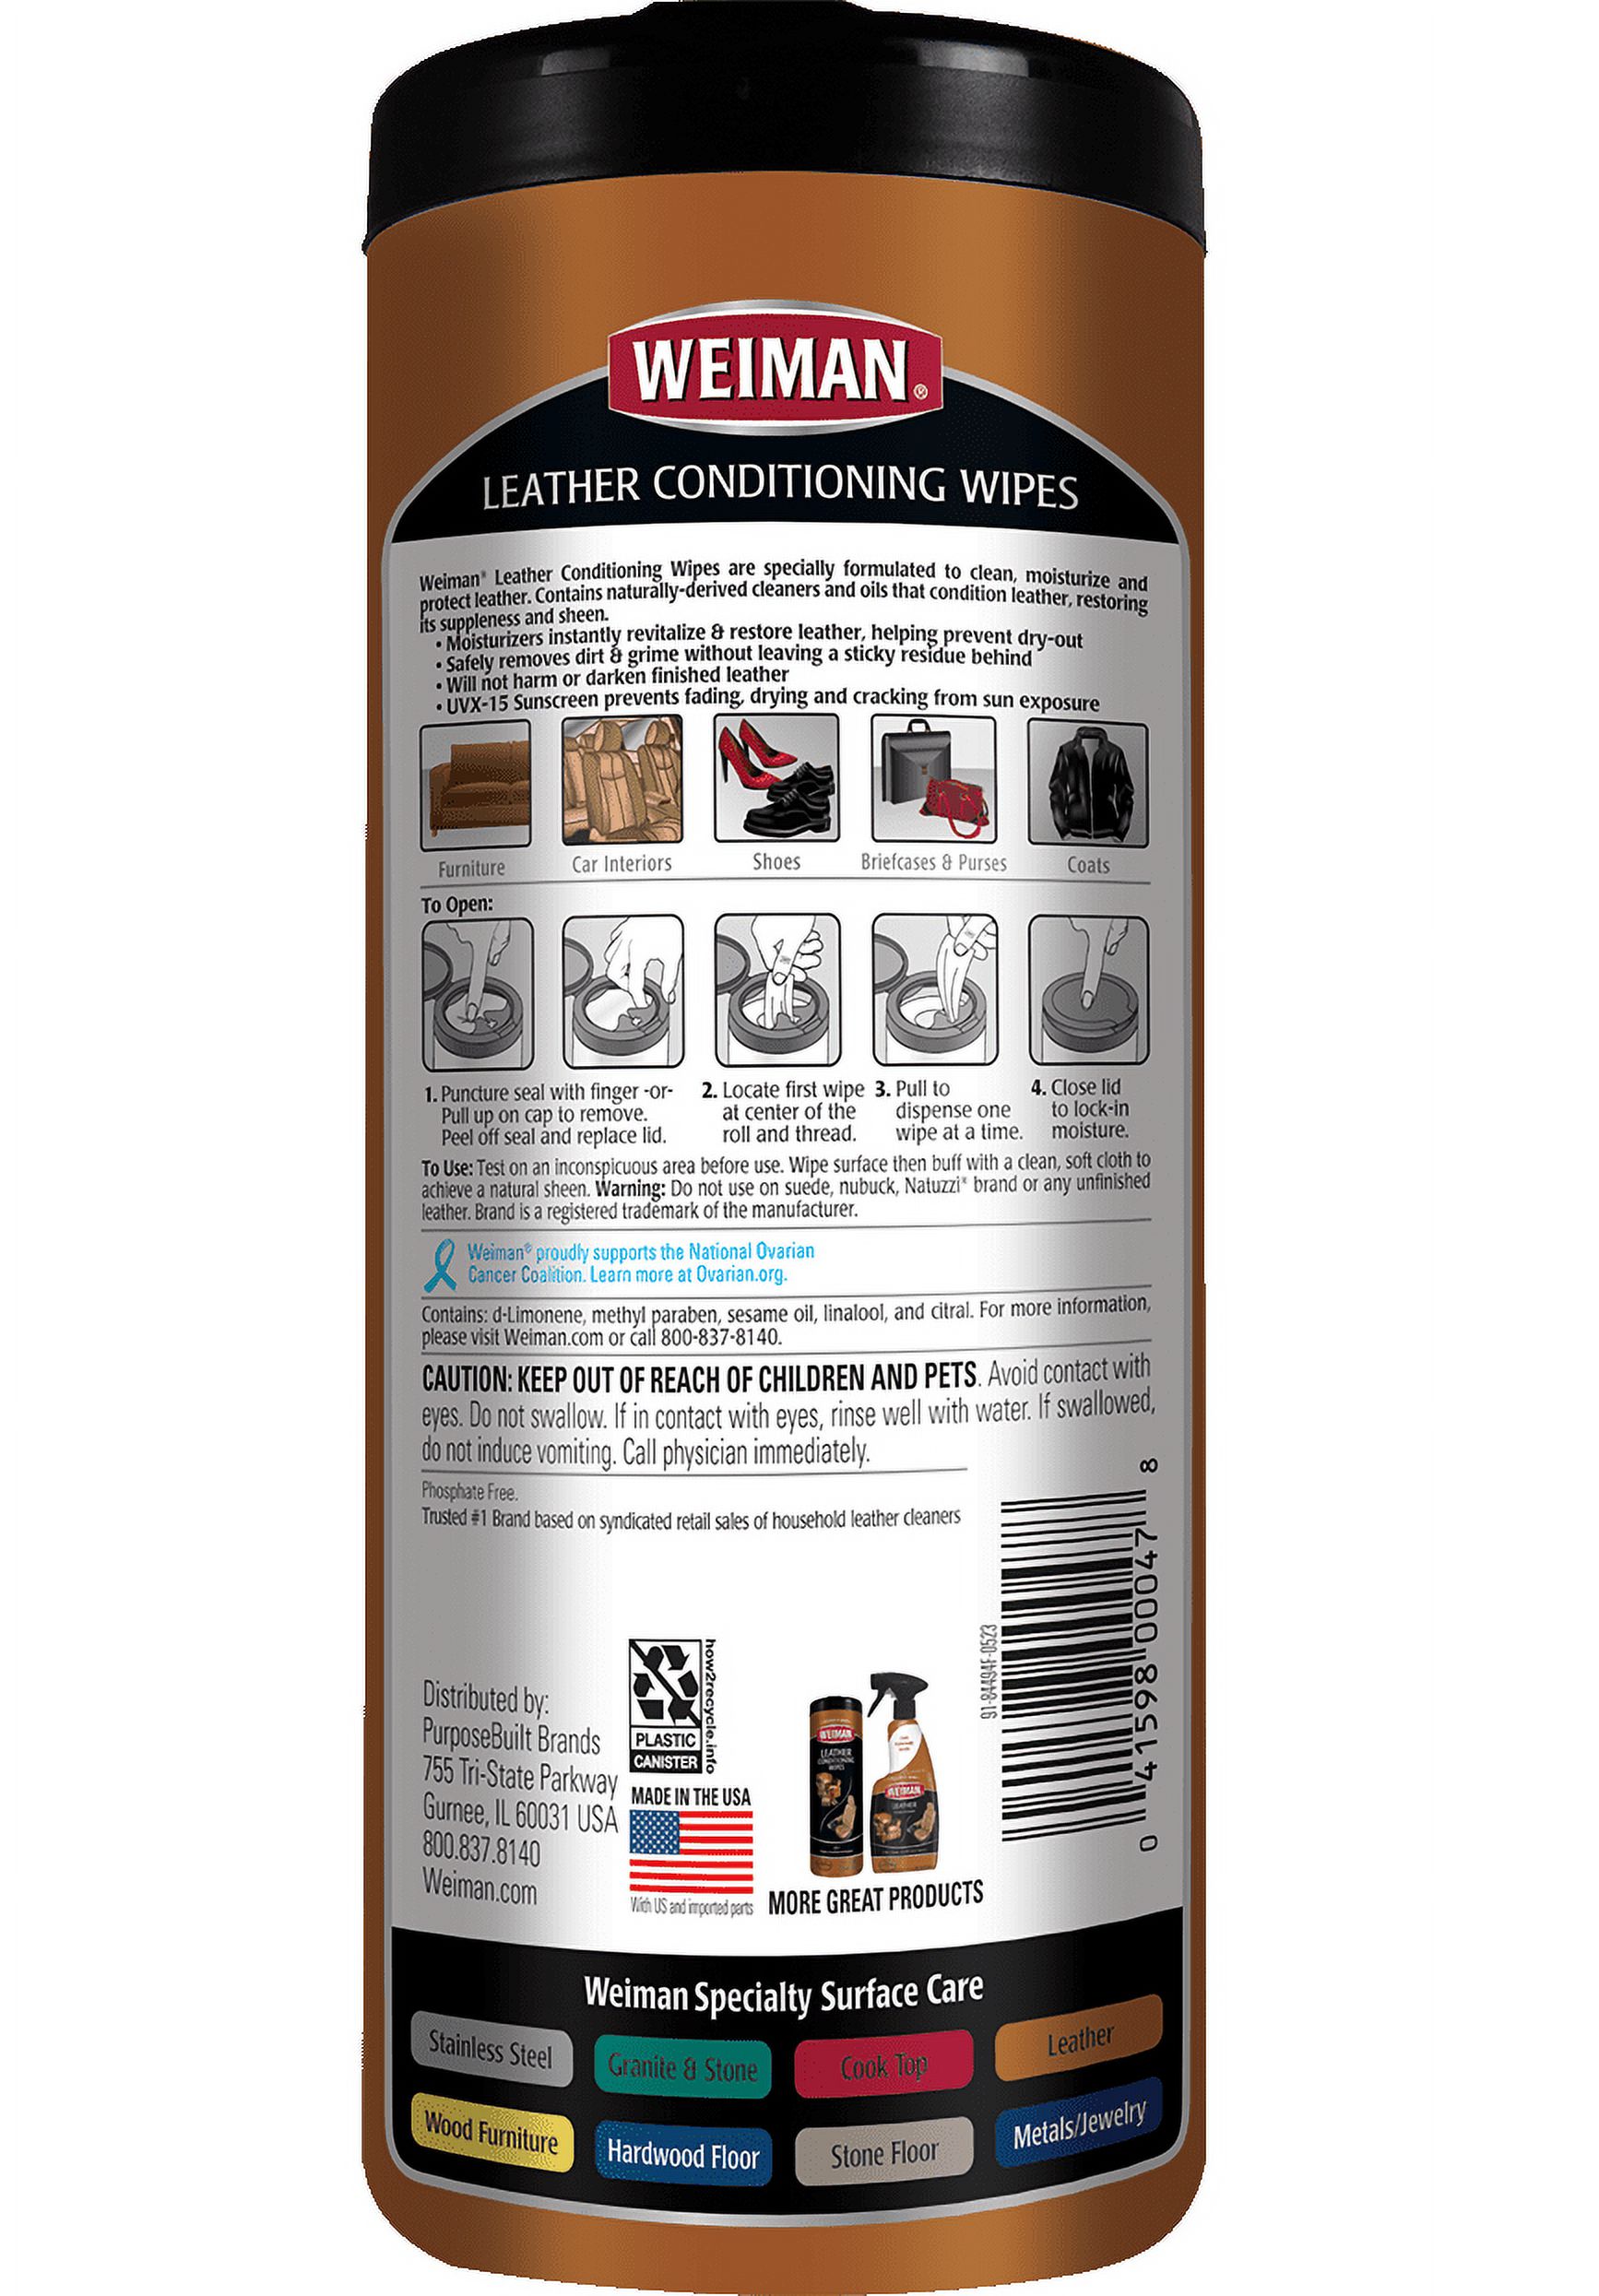 Weiman 3-1 Leather Cleaner, Conditioner & Protector Wipes, 30 Count - image 2 of 10